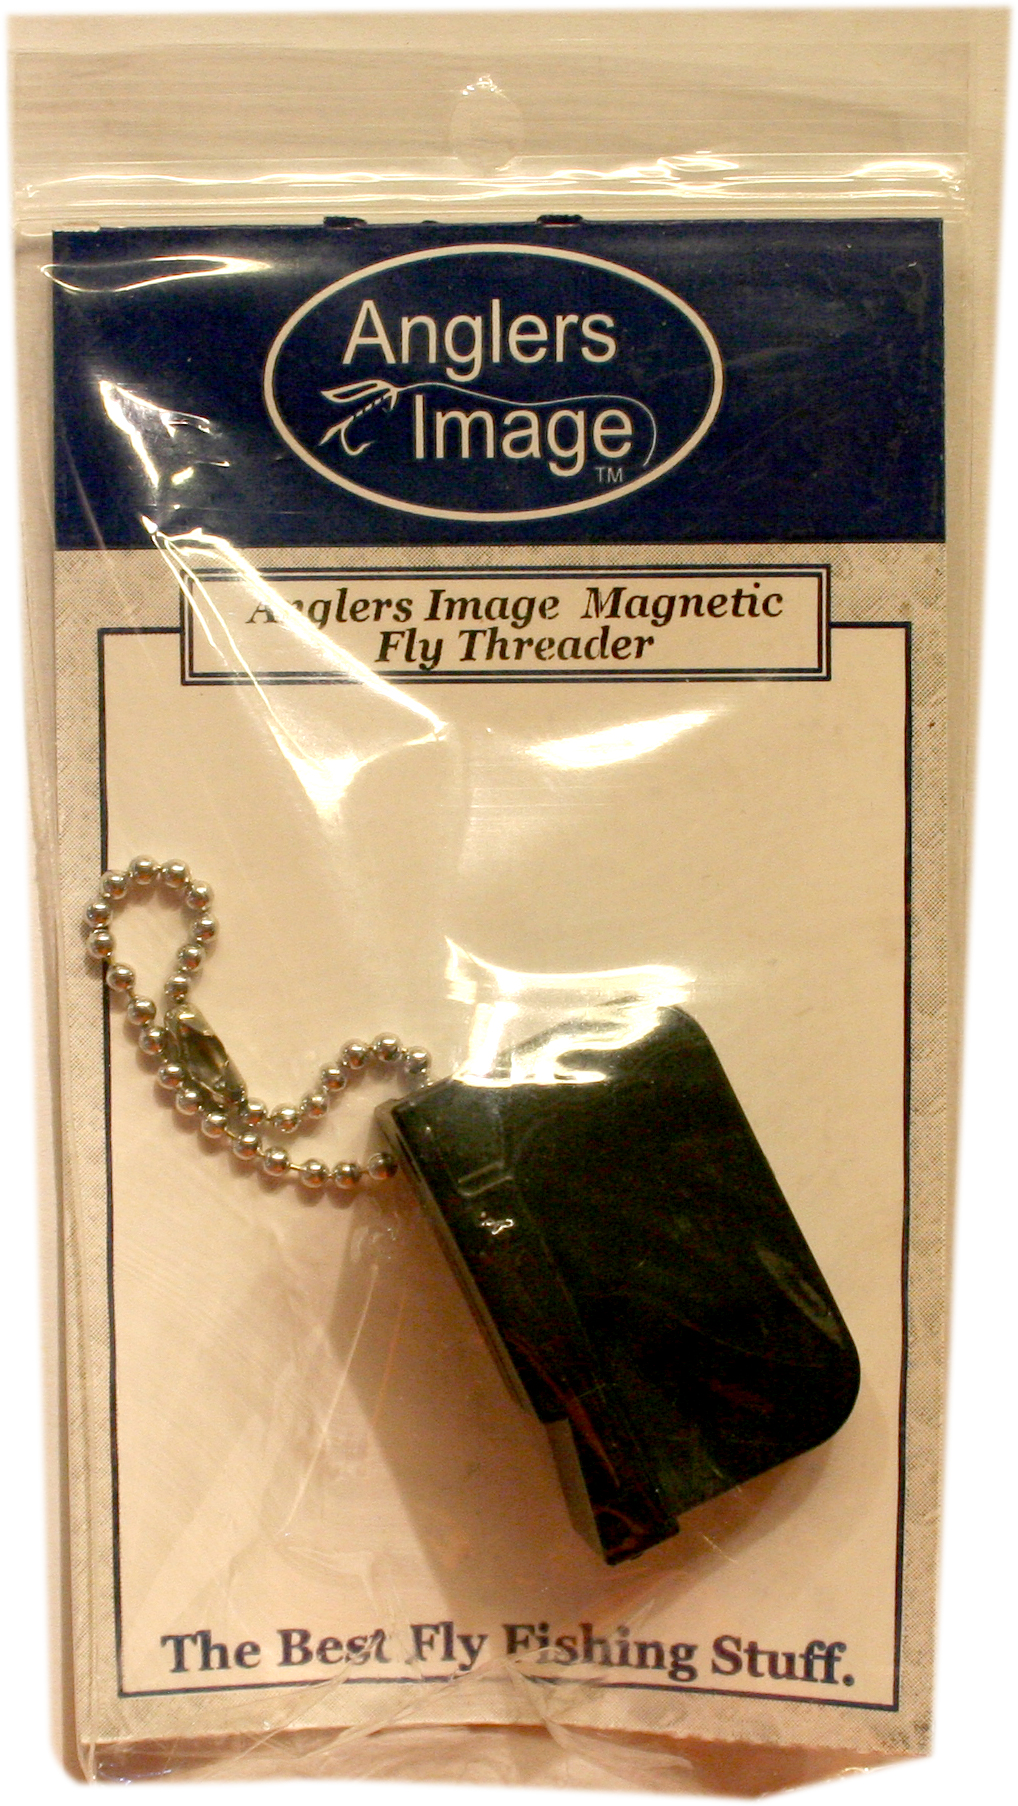 Magnetic Fly Threader colore Nero - Anglers Image 